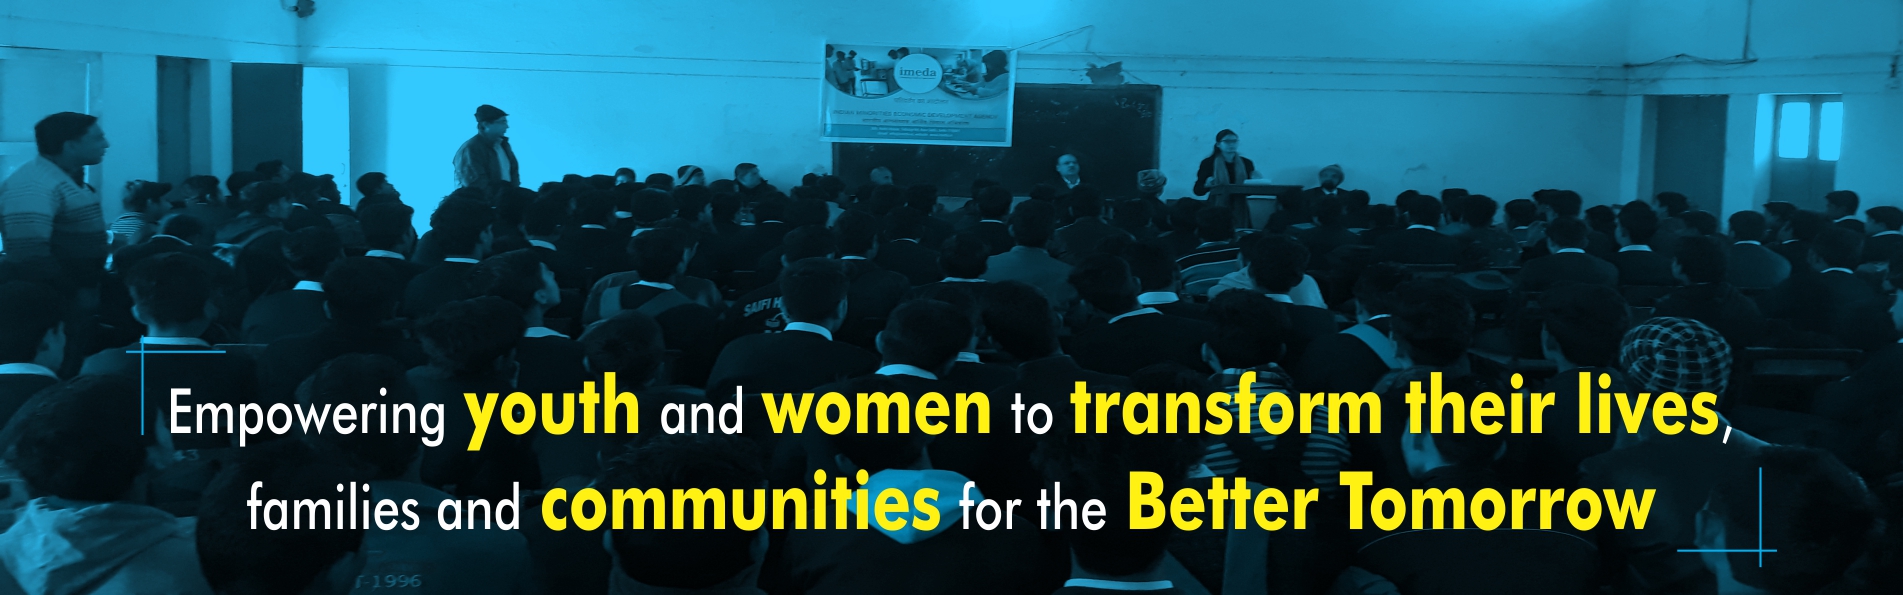 Empowering youth and women to transform their lives, families and communities for the better tomorrow | women empowerment